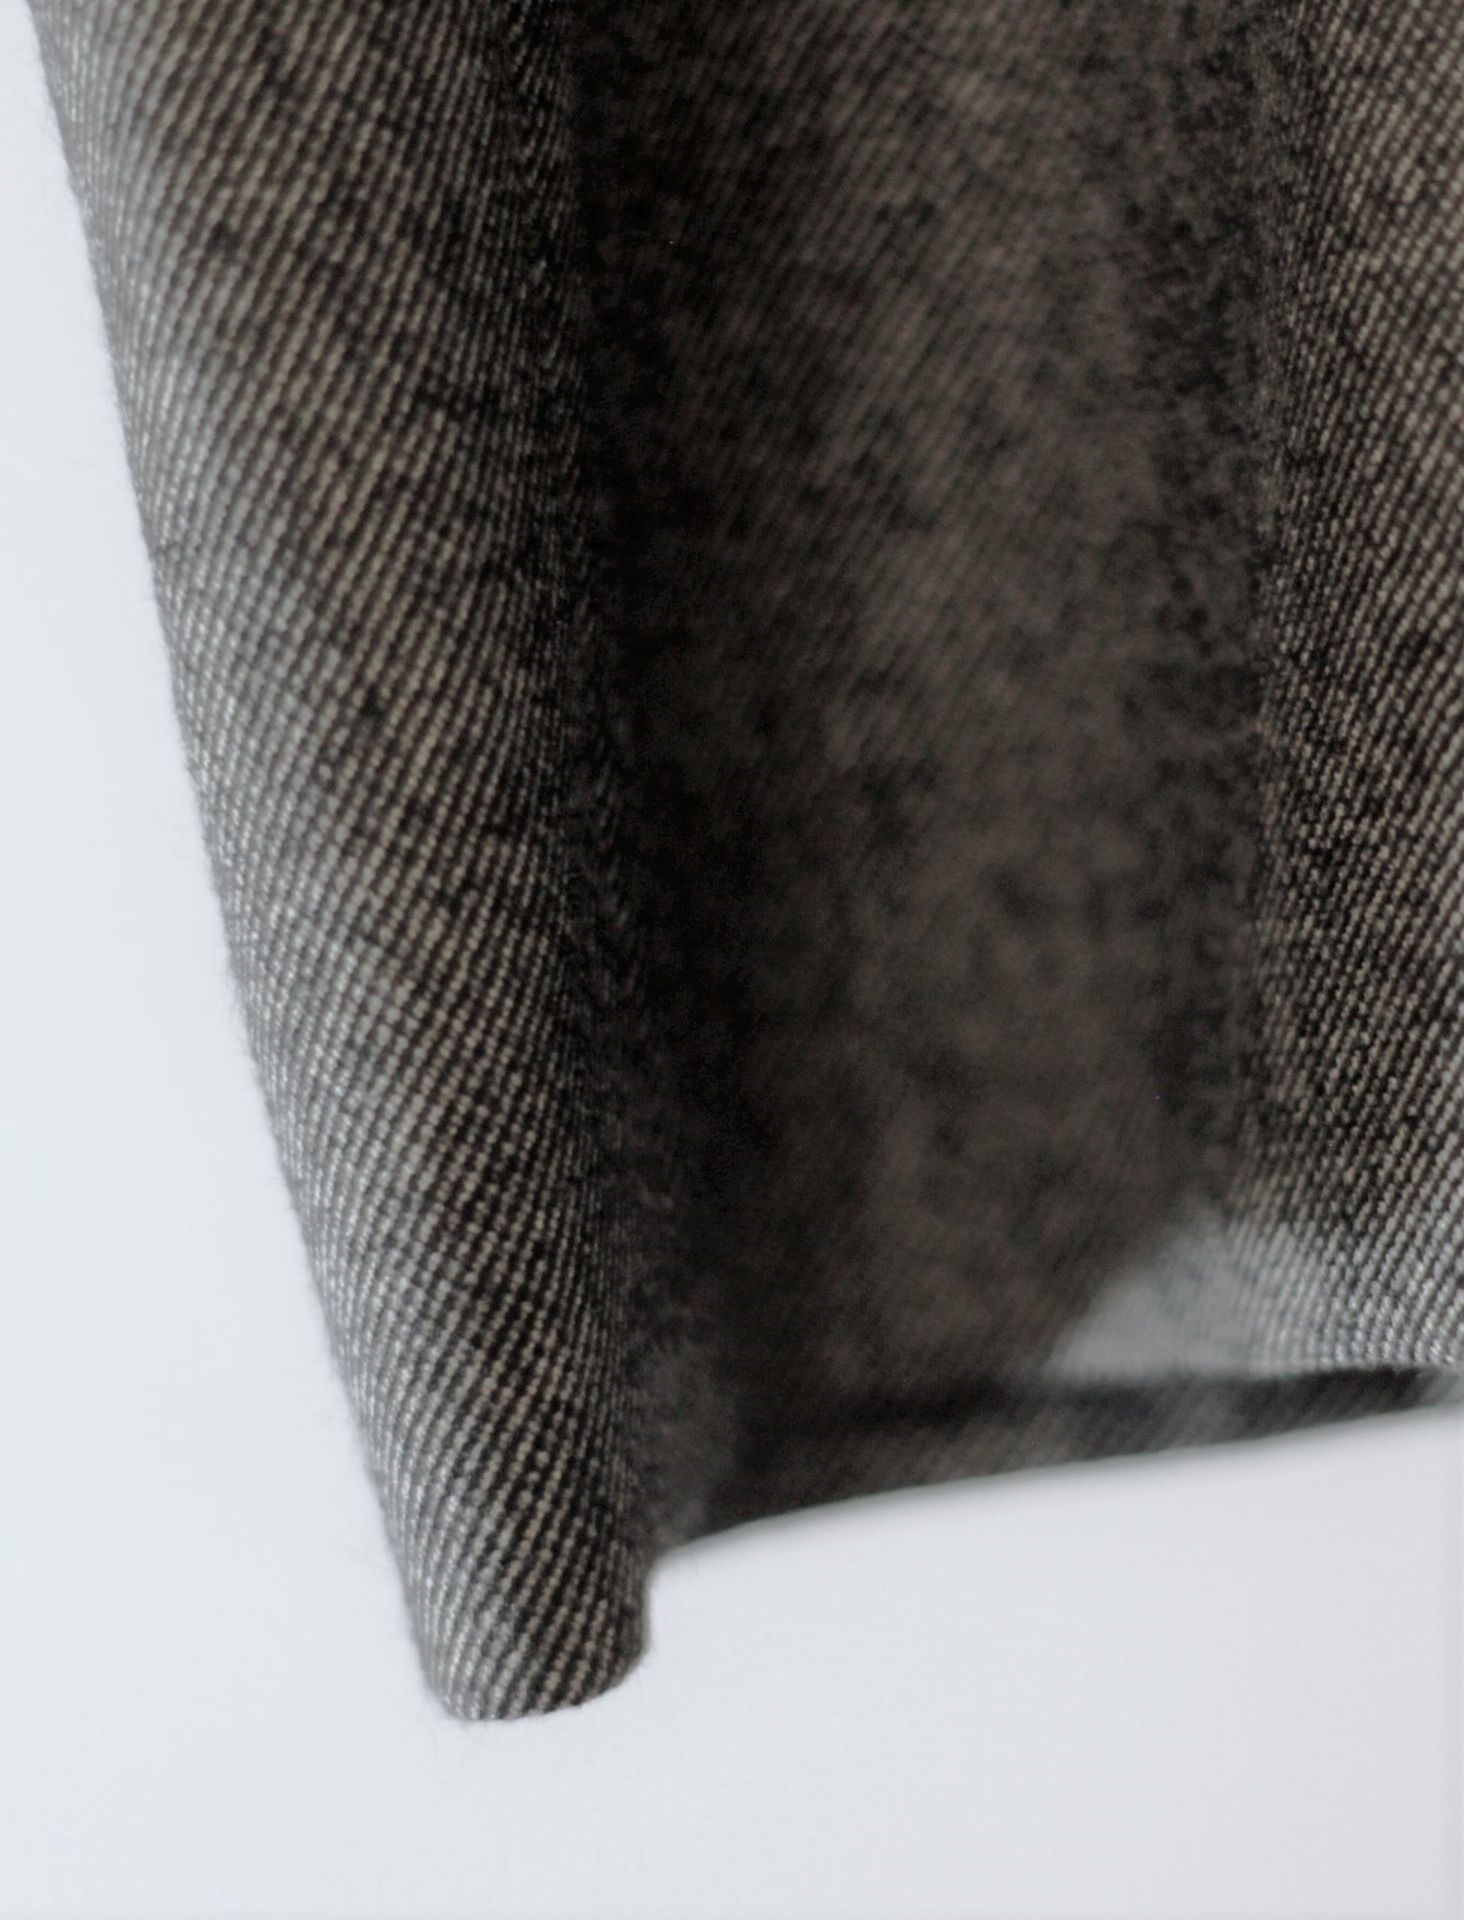 1 x Agnona Grey Tweed Trousers - Size: 22 - Material: 55% Cotton, 42% Virgin Wool, 2% Nylon, 1% - Image 5 of 6